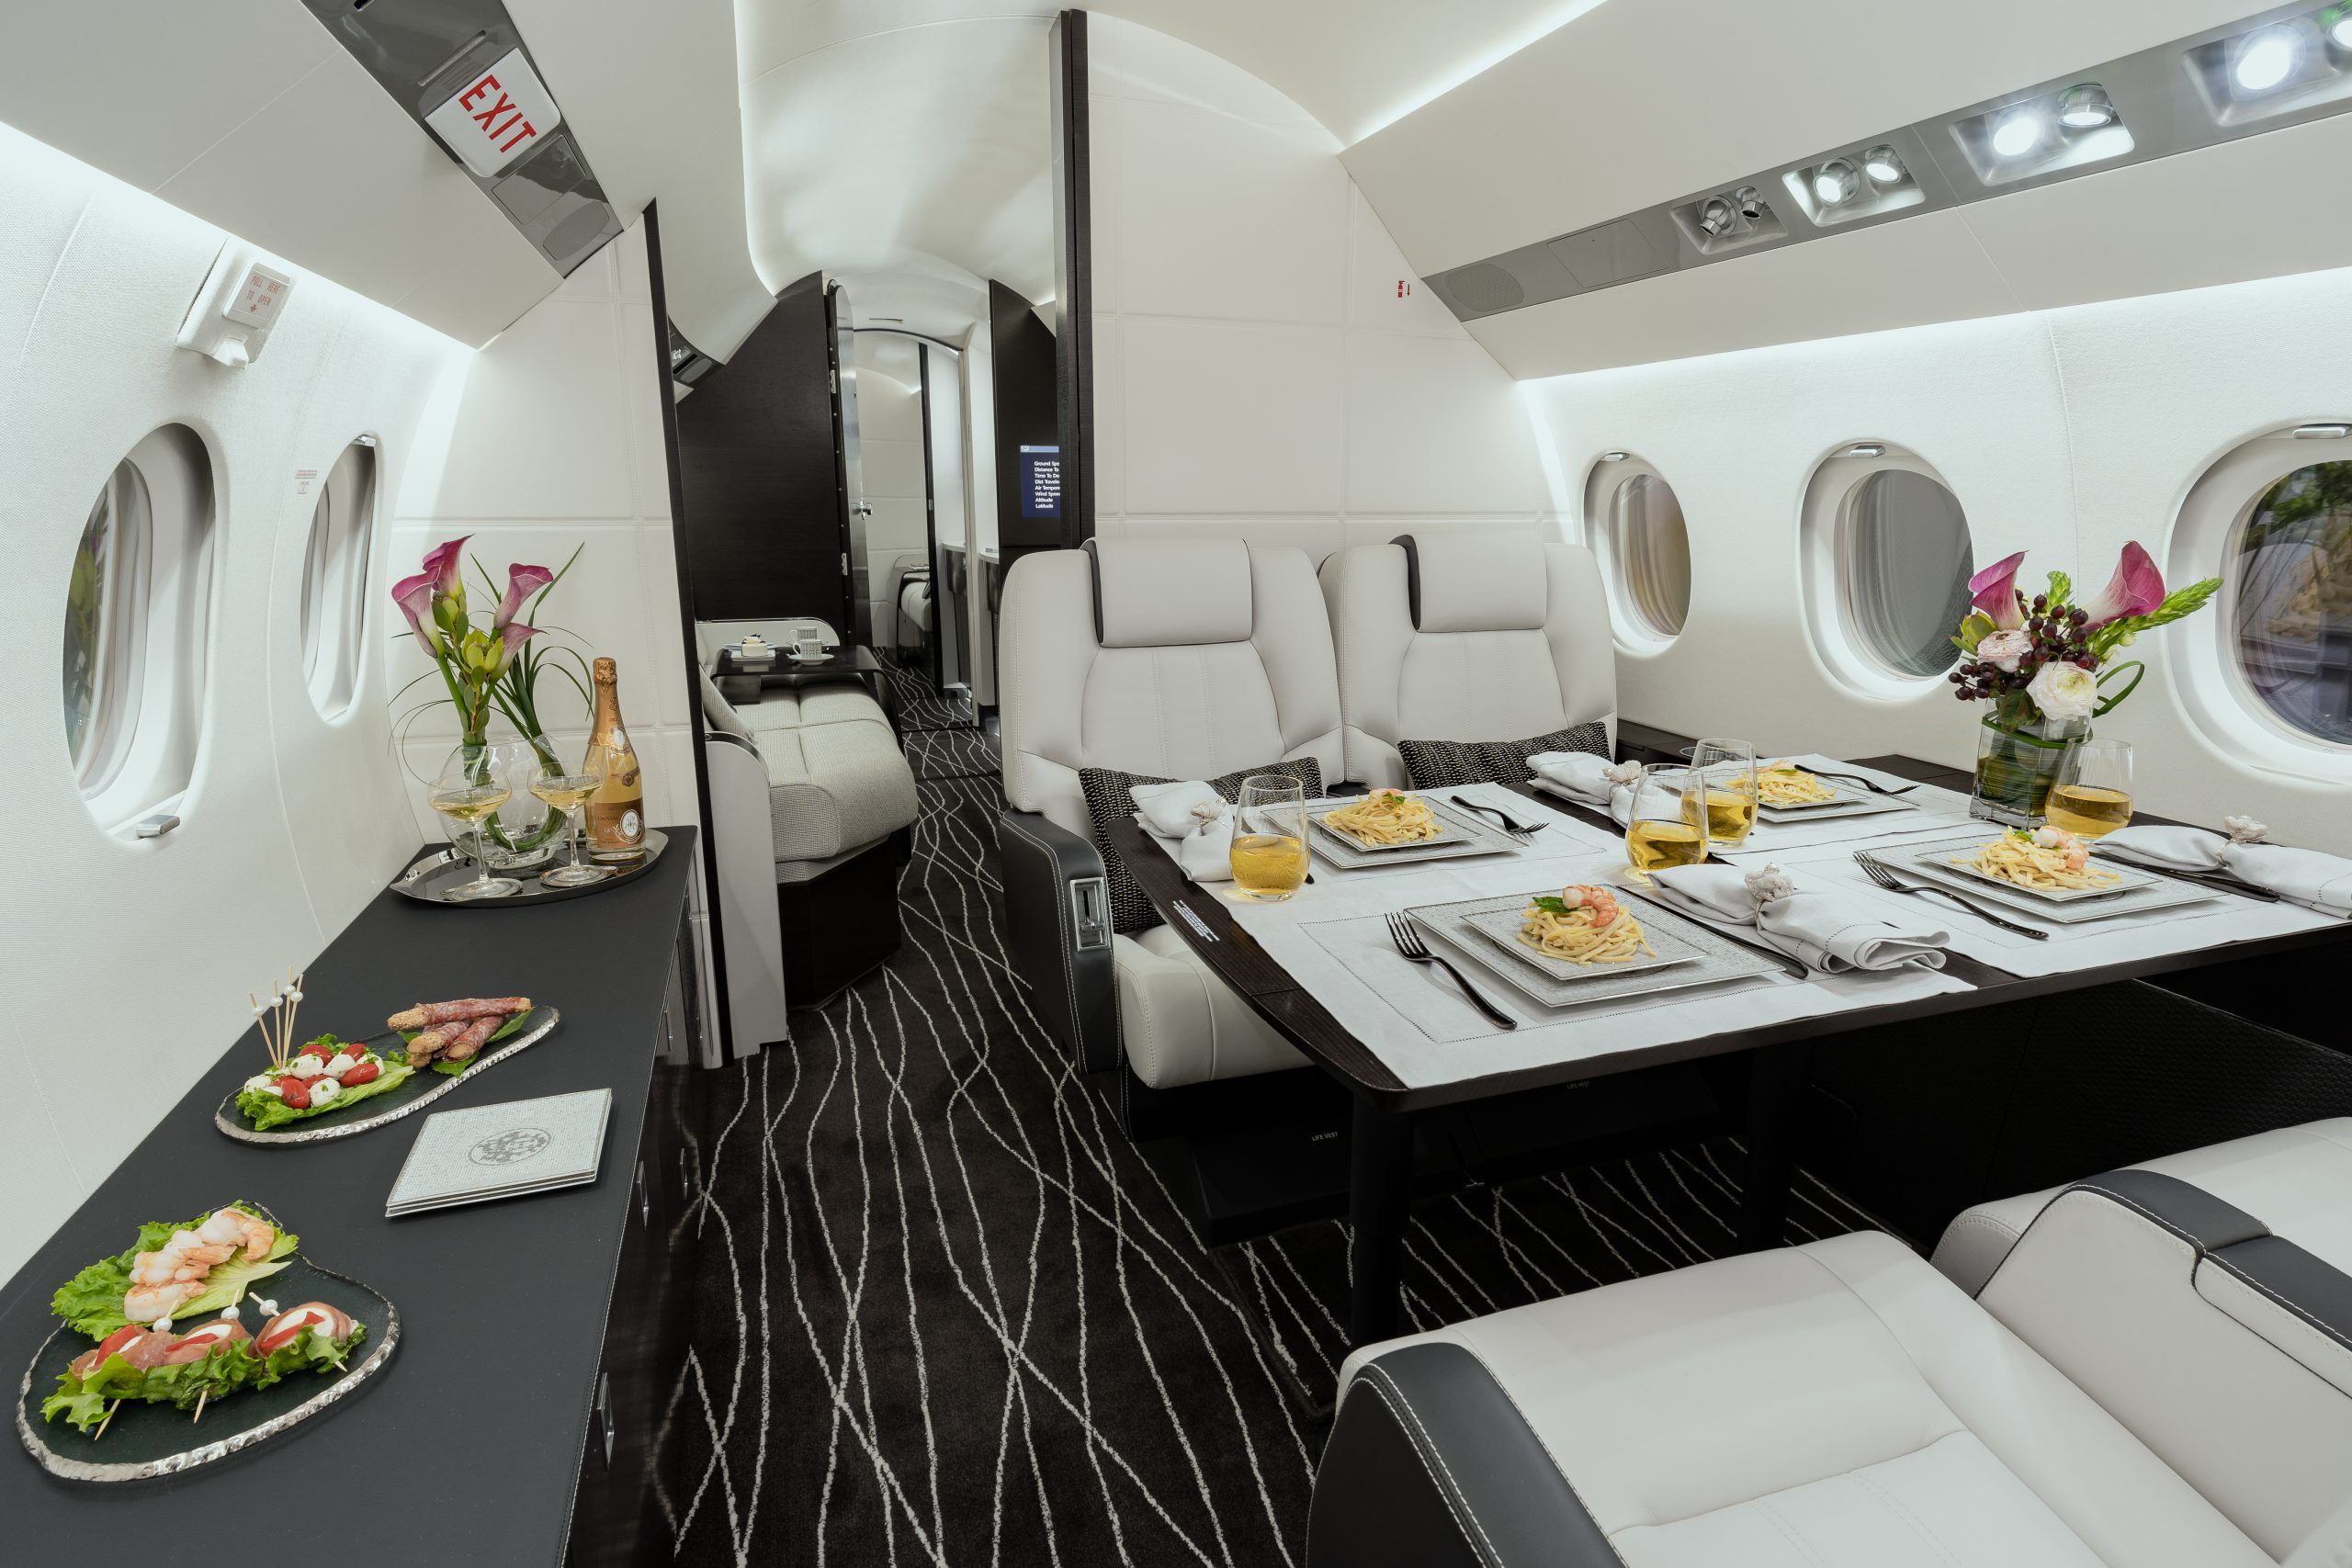 Inside the dining area of a private jet, already set up for dinner.